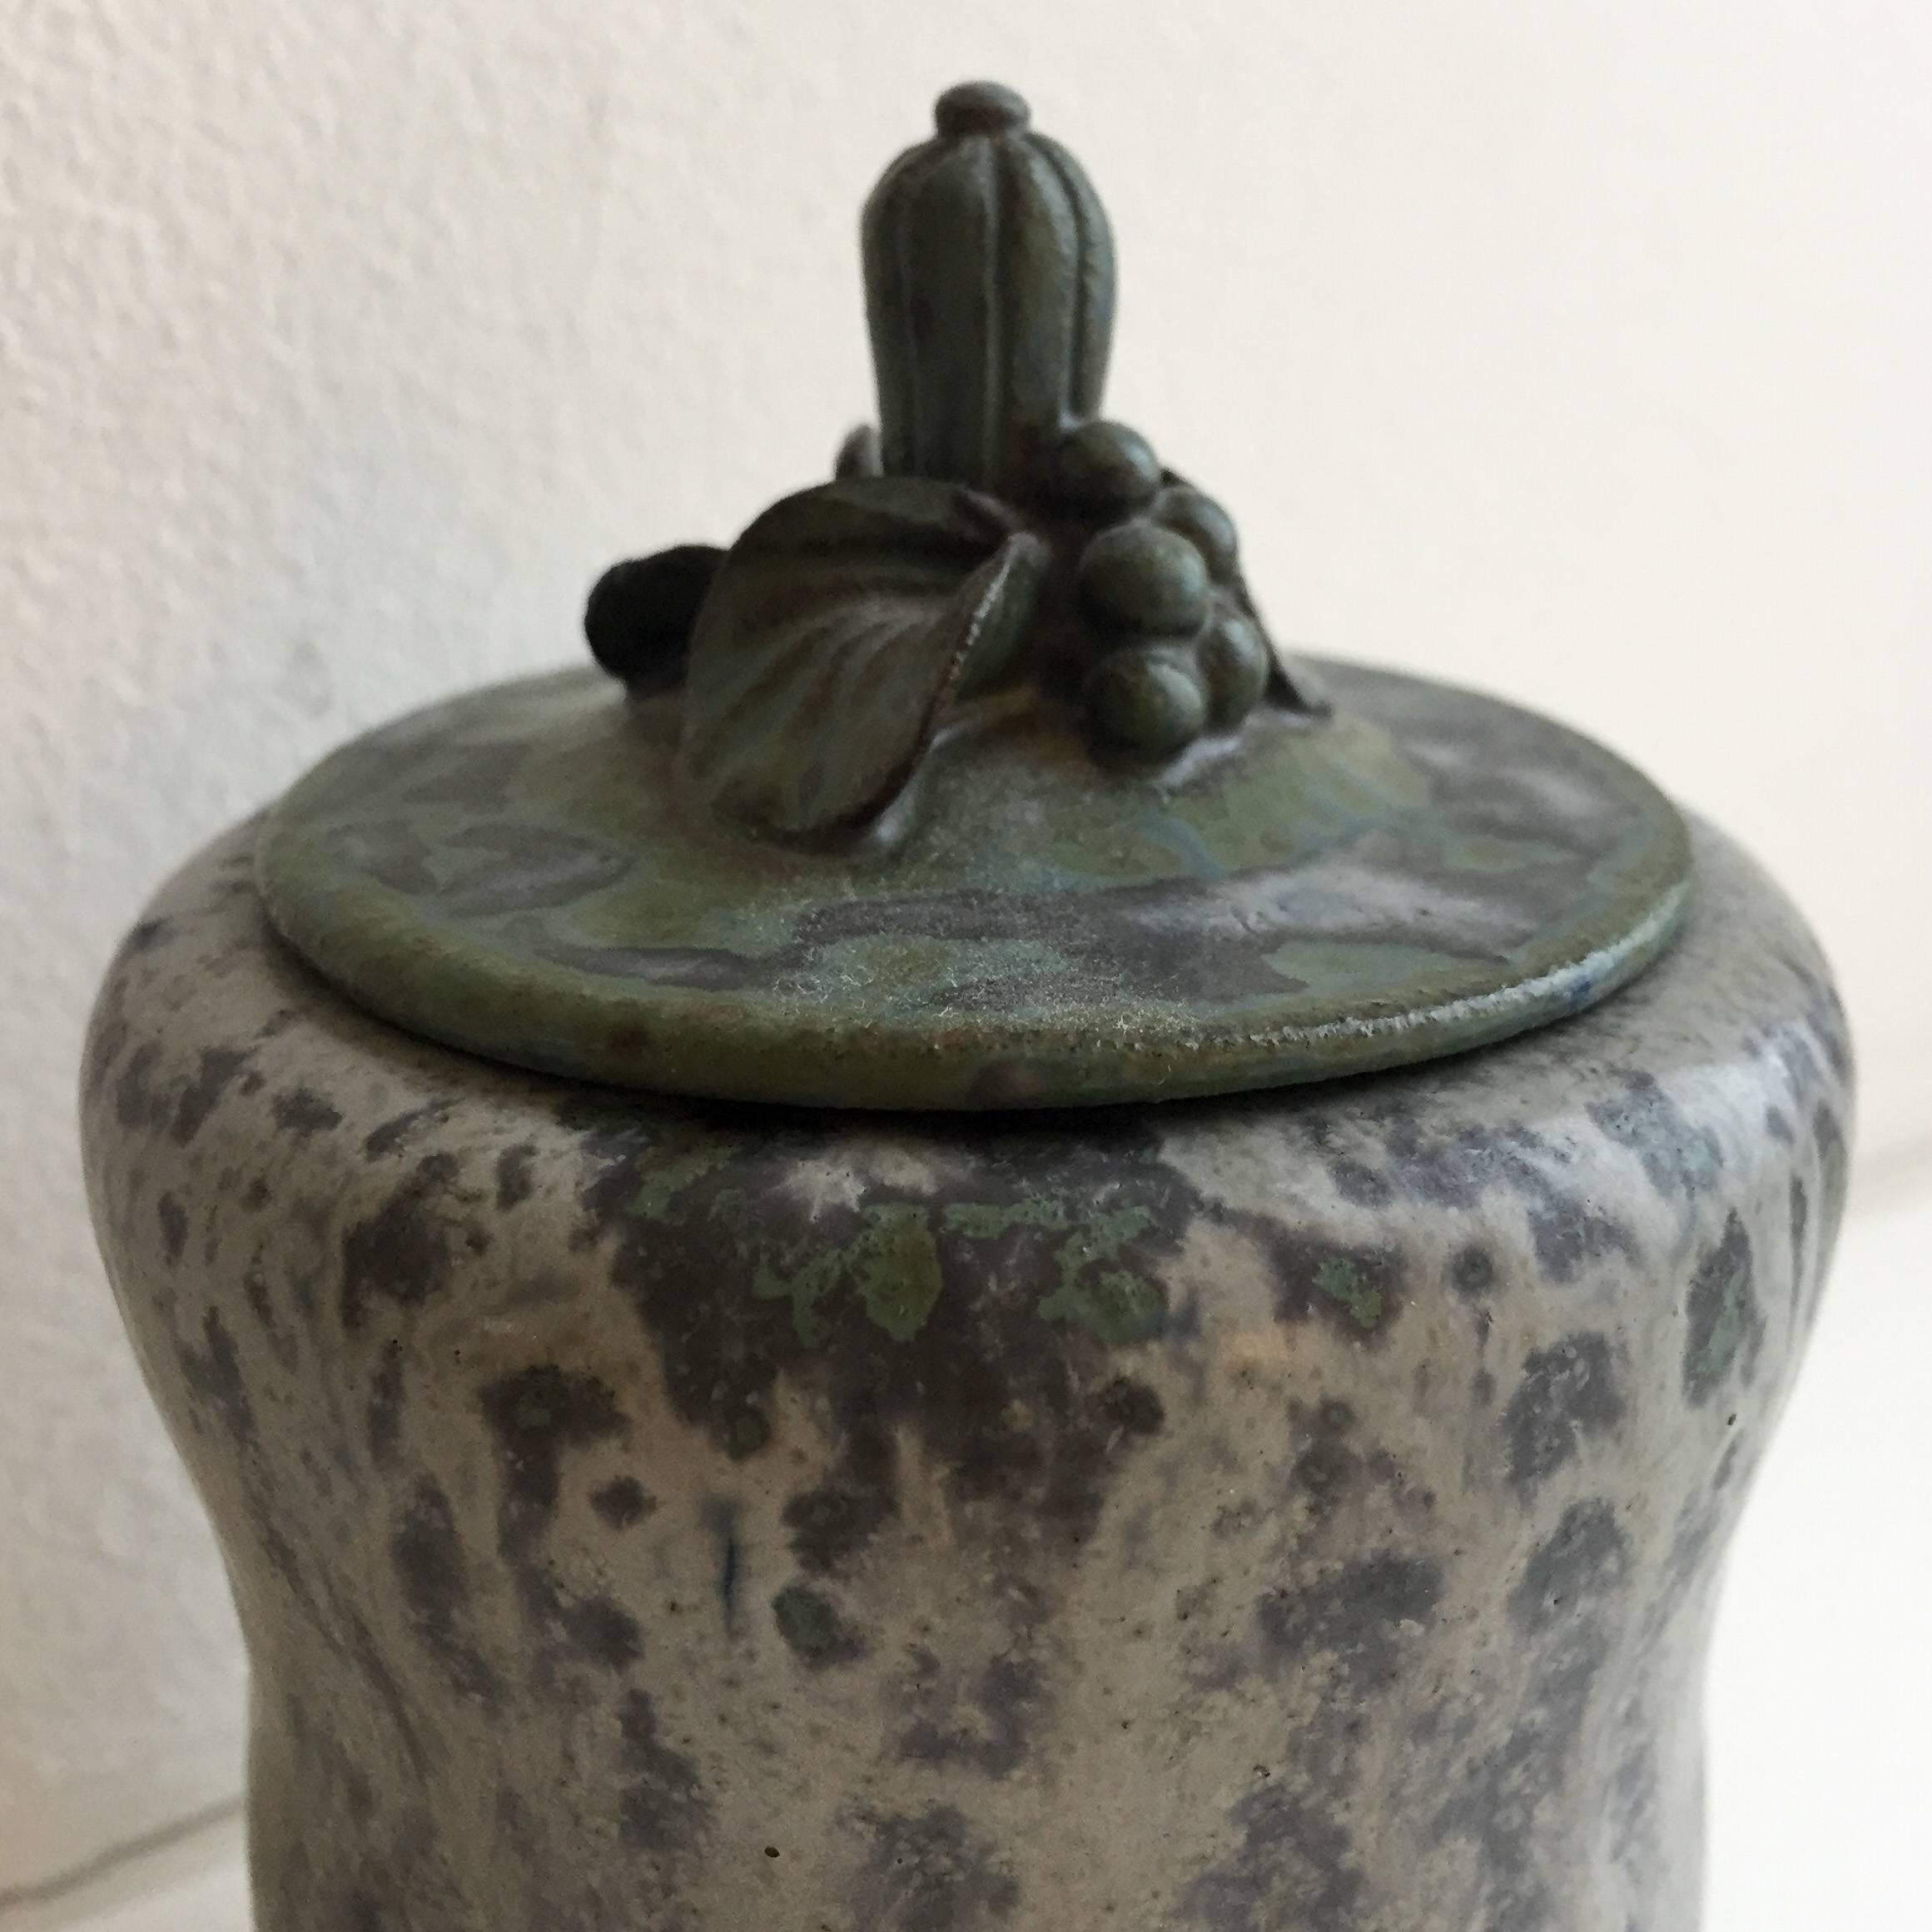 Arne Bang stoneware lidded jar green/grey glazed Model 10 - 1950s Signed with his initials.
Mint condition.